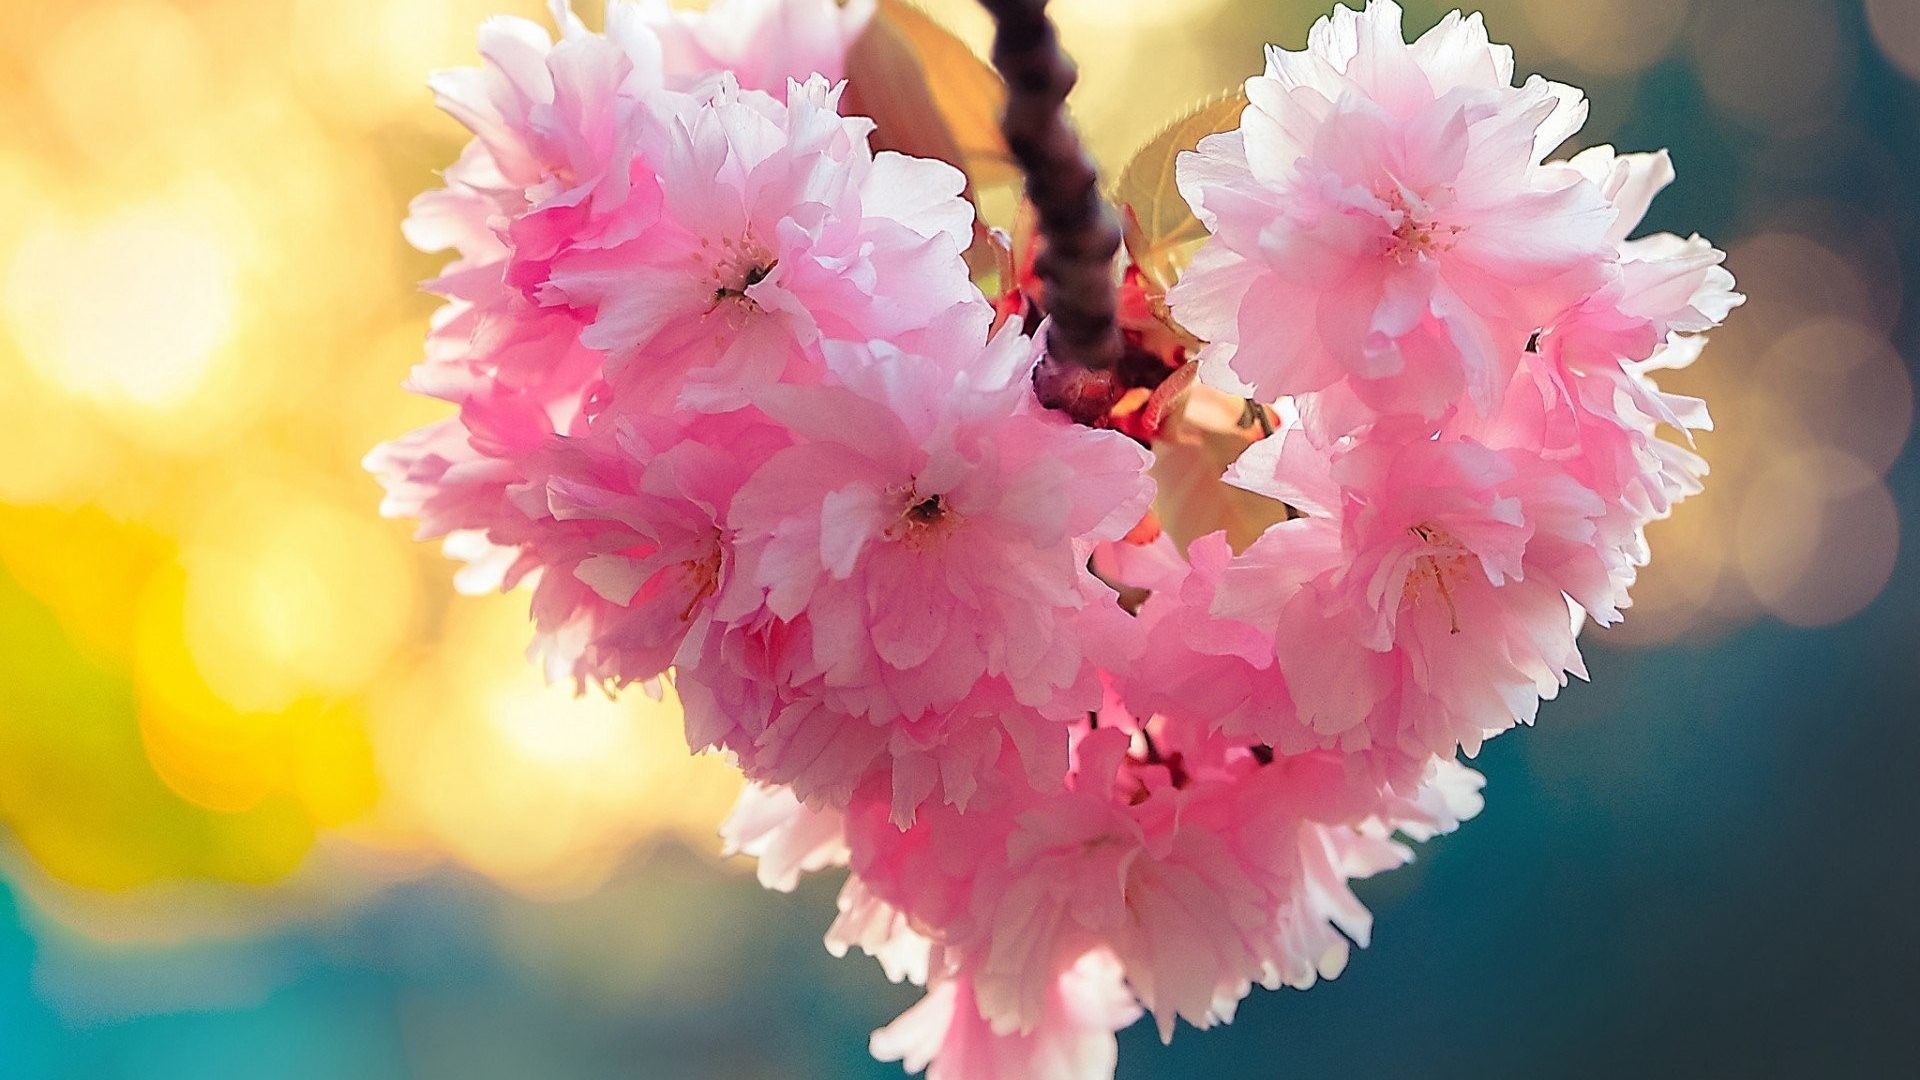 1920x1080 Flowers Spring Nature Love Heart Bloom Android Hd Wallpapers Free Download  - 1920x1200